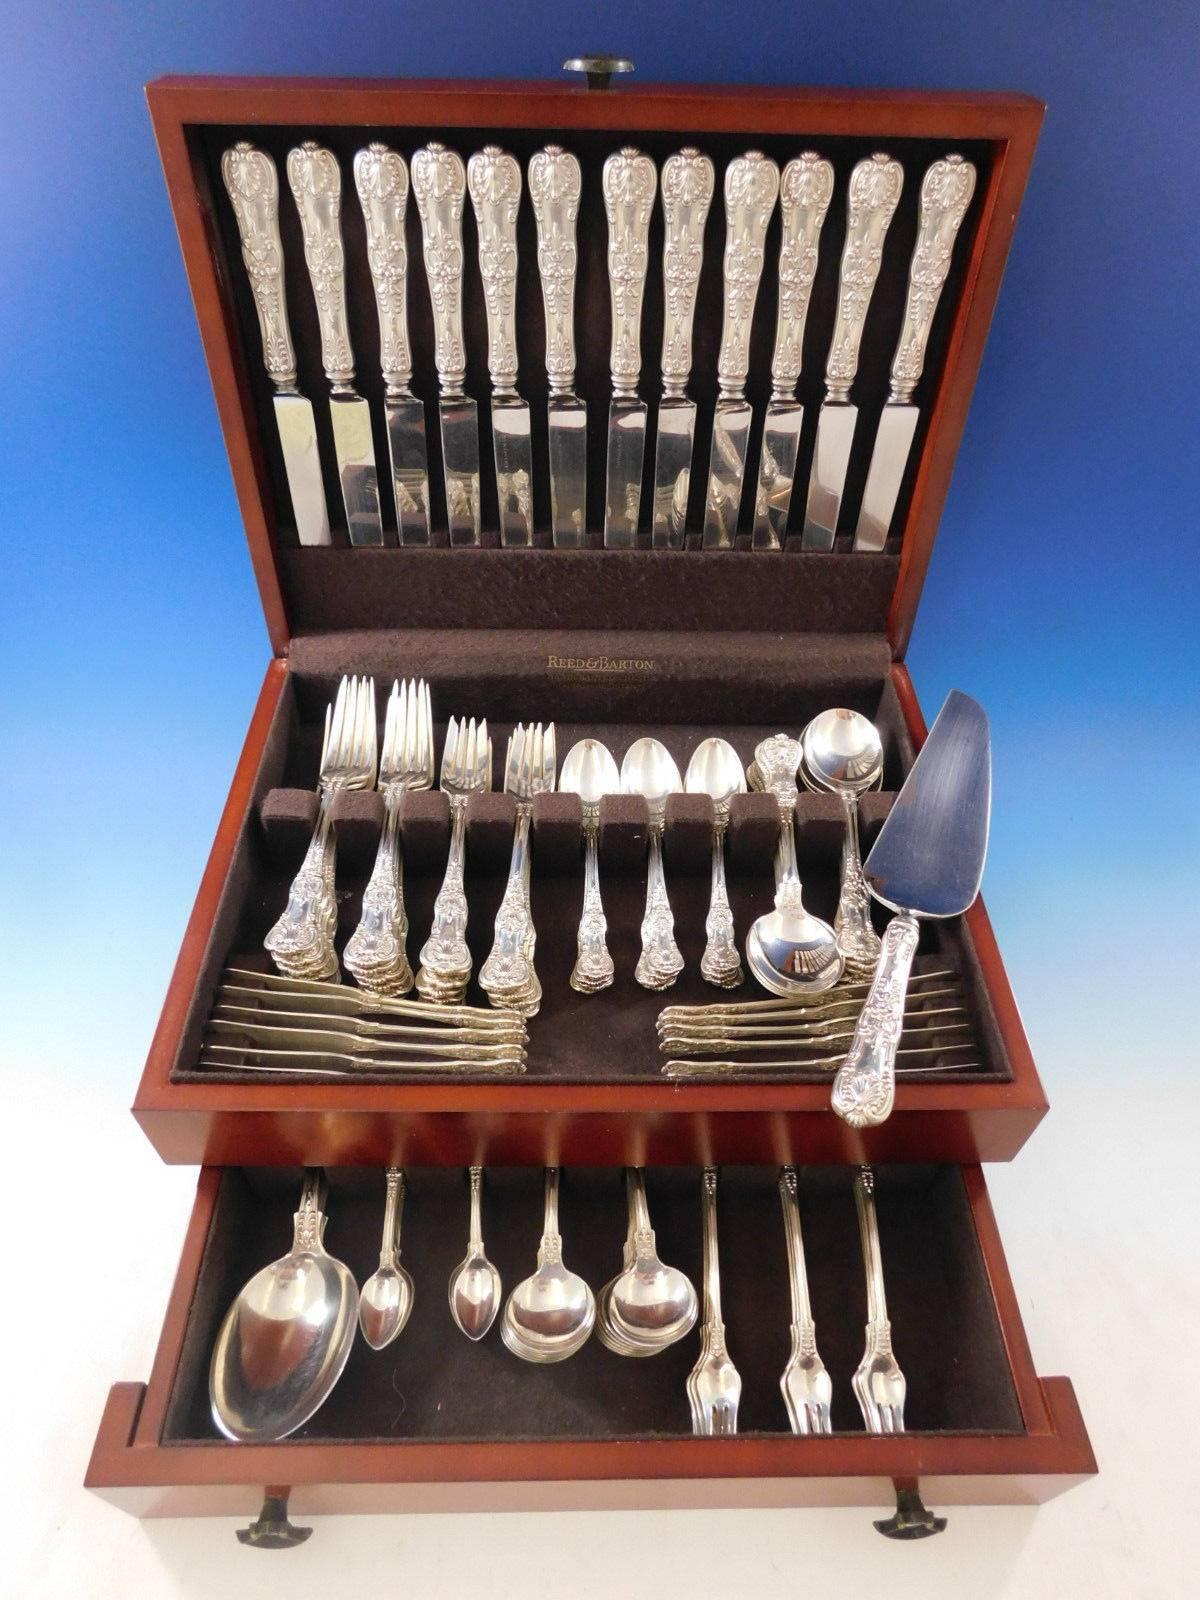 Dinner Size English King by Tiffany & Co. Sterling silver Flatware set, 111 pieces. This impressive set includes:

12 Dinner Size Knives, 10 1/4